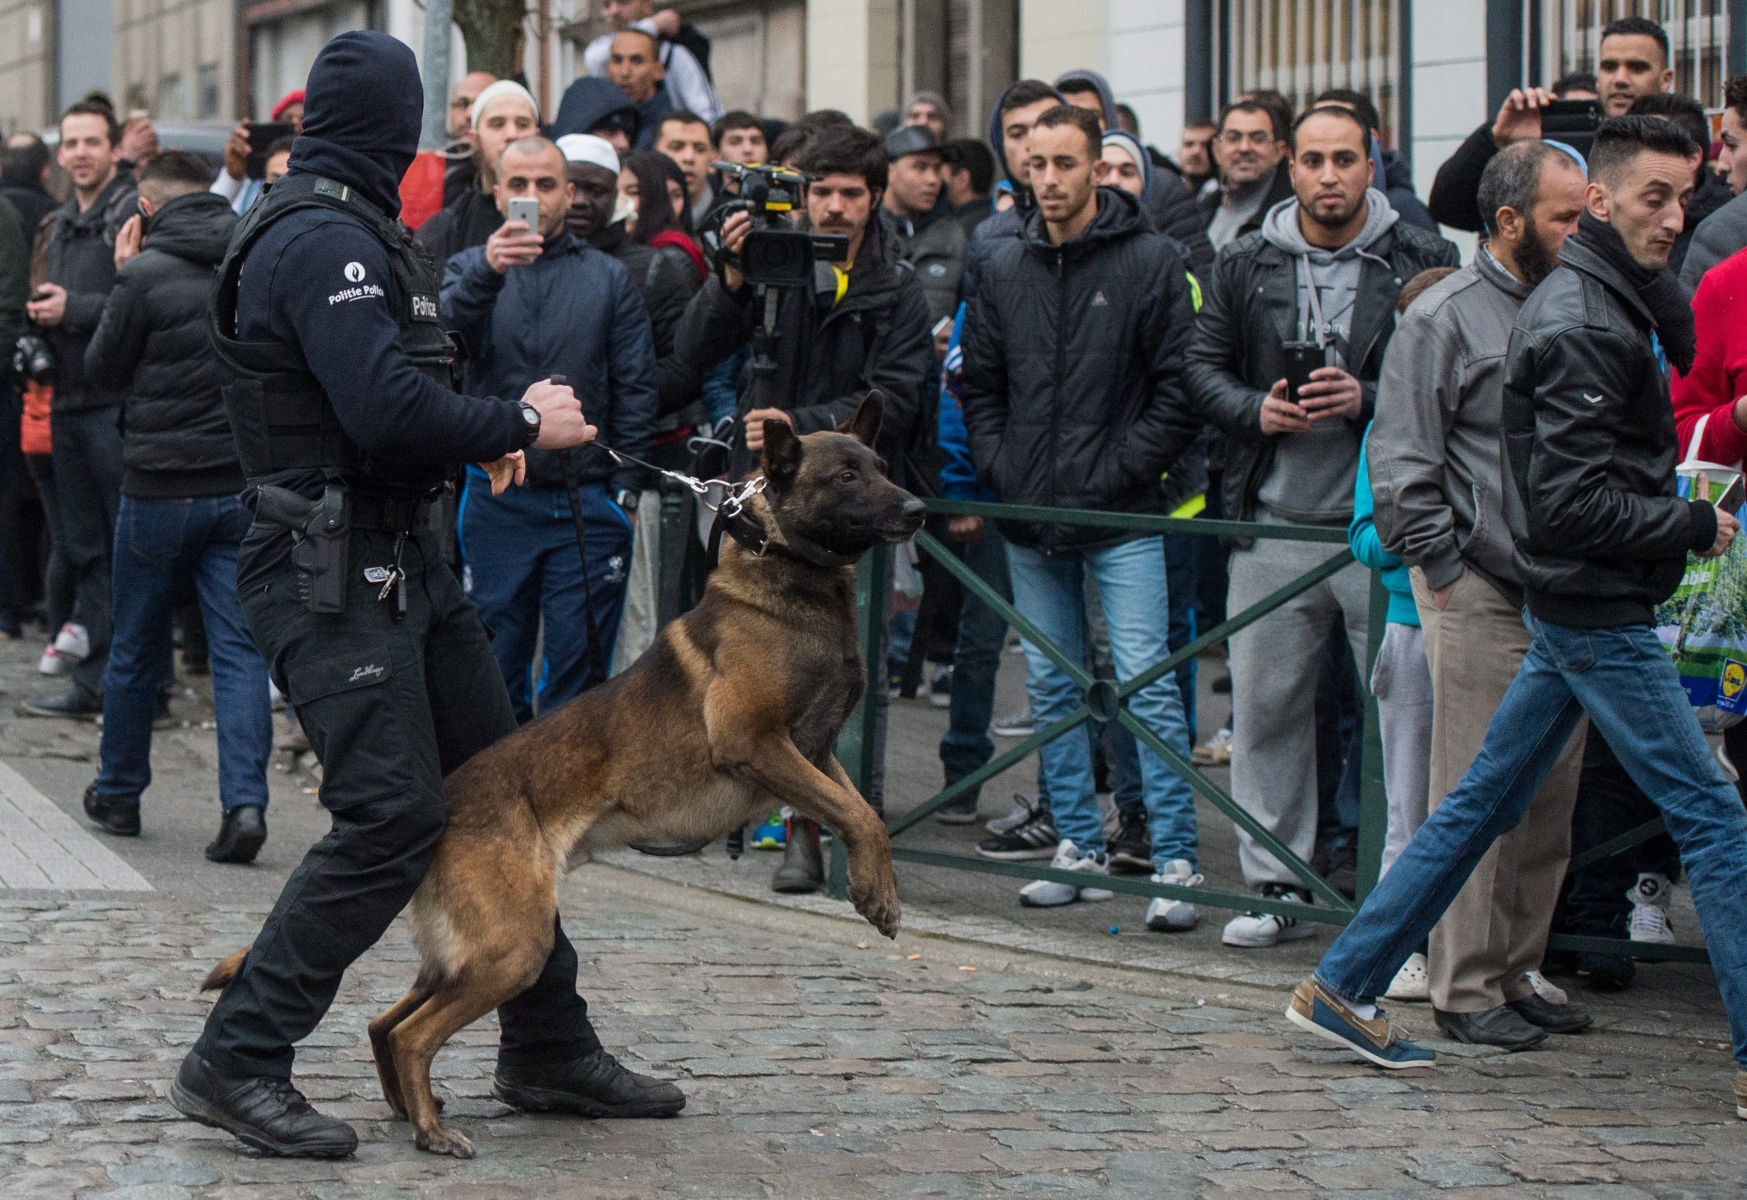 epa05218780 A Belgian police dog handler holds back curious onlookers during an anti-terror operation in the Molenbeek neighborhood of Brussels, Belgium, 18 March 2016. Media reports claim that fugitive terror suspect Salah Abdeslam has been wounded but arrested alive during the anti-terror operation in Molenbeek that was carried out within the investigations linked to last year's Paris terror attacks.  EPA/STEPHANIE LECOCQ BELGIUM TERRORIST RAID